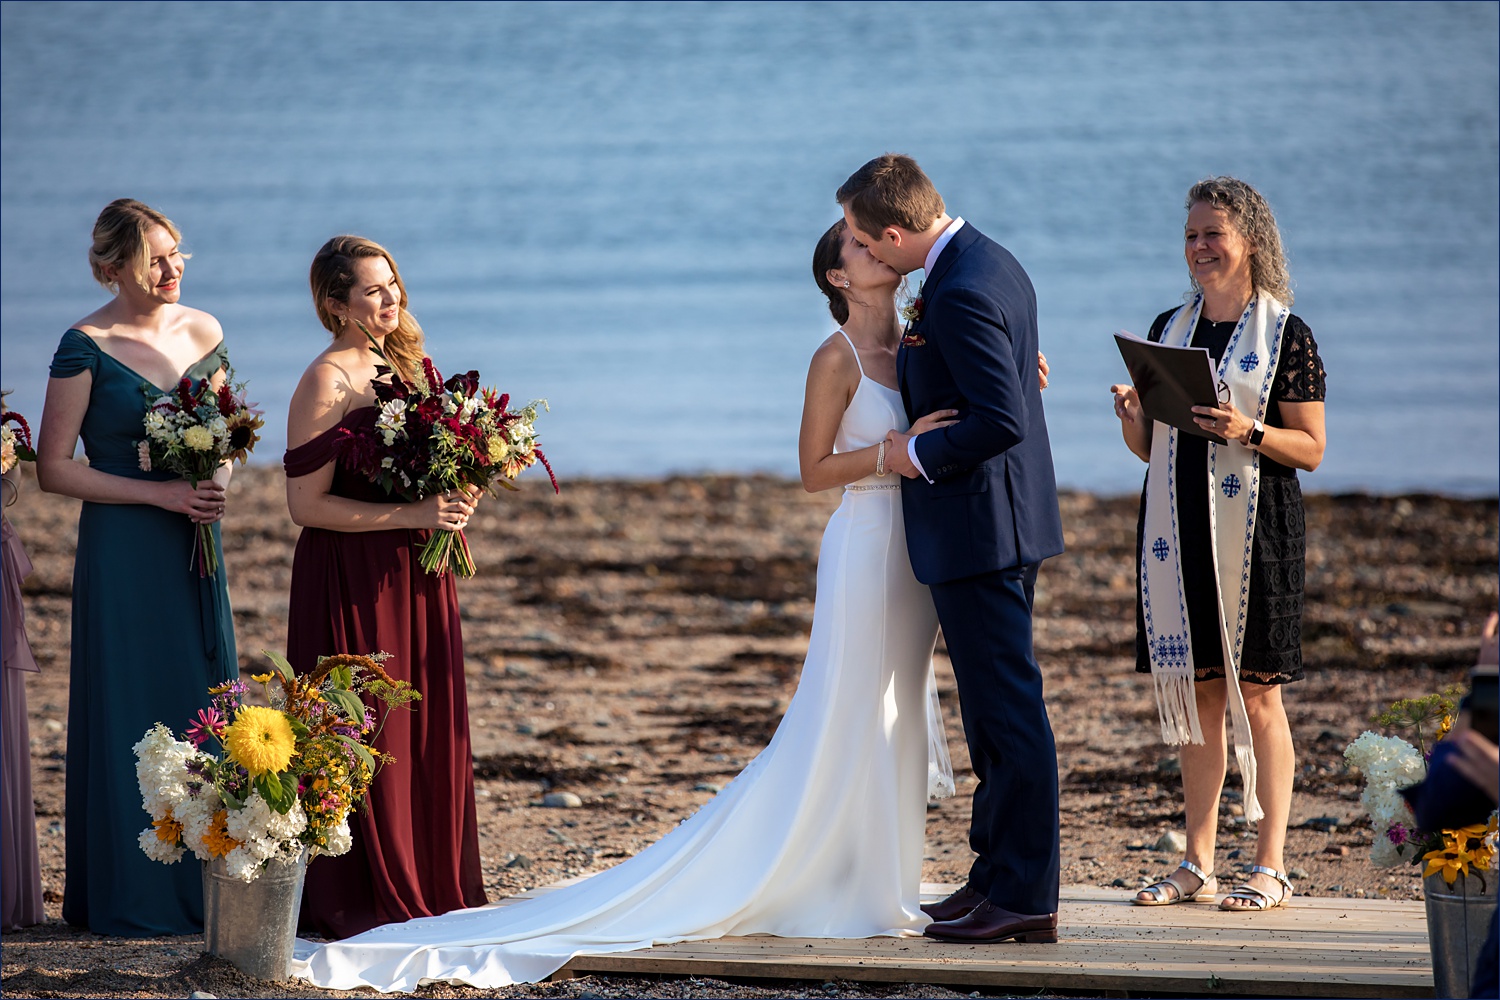 The married couple kisses on their Maine wedding day ceremony